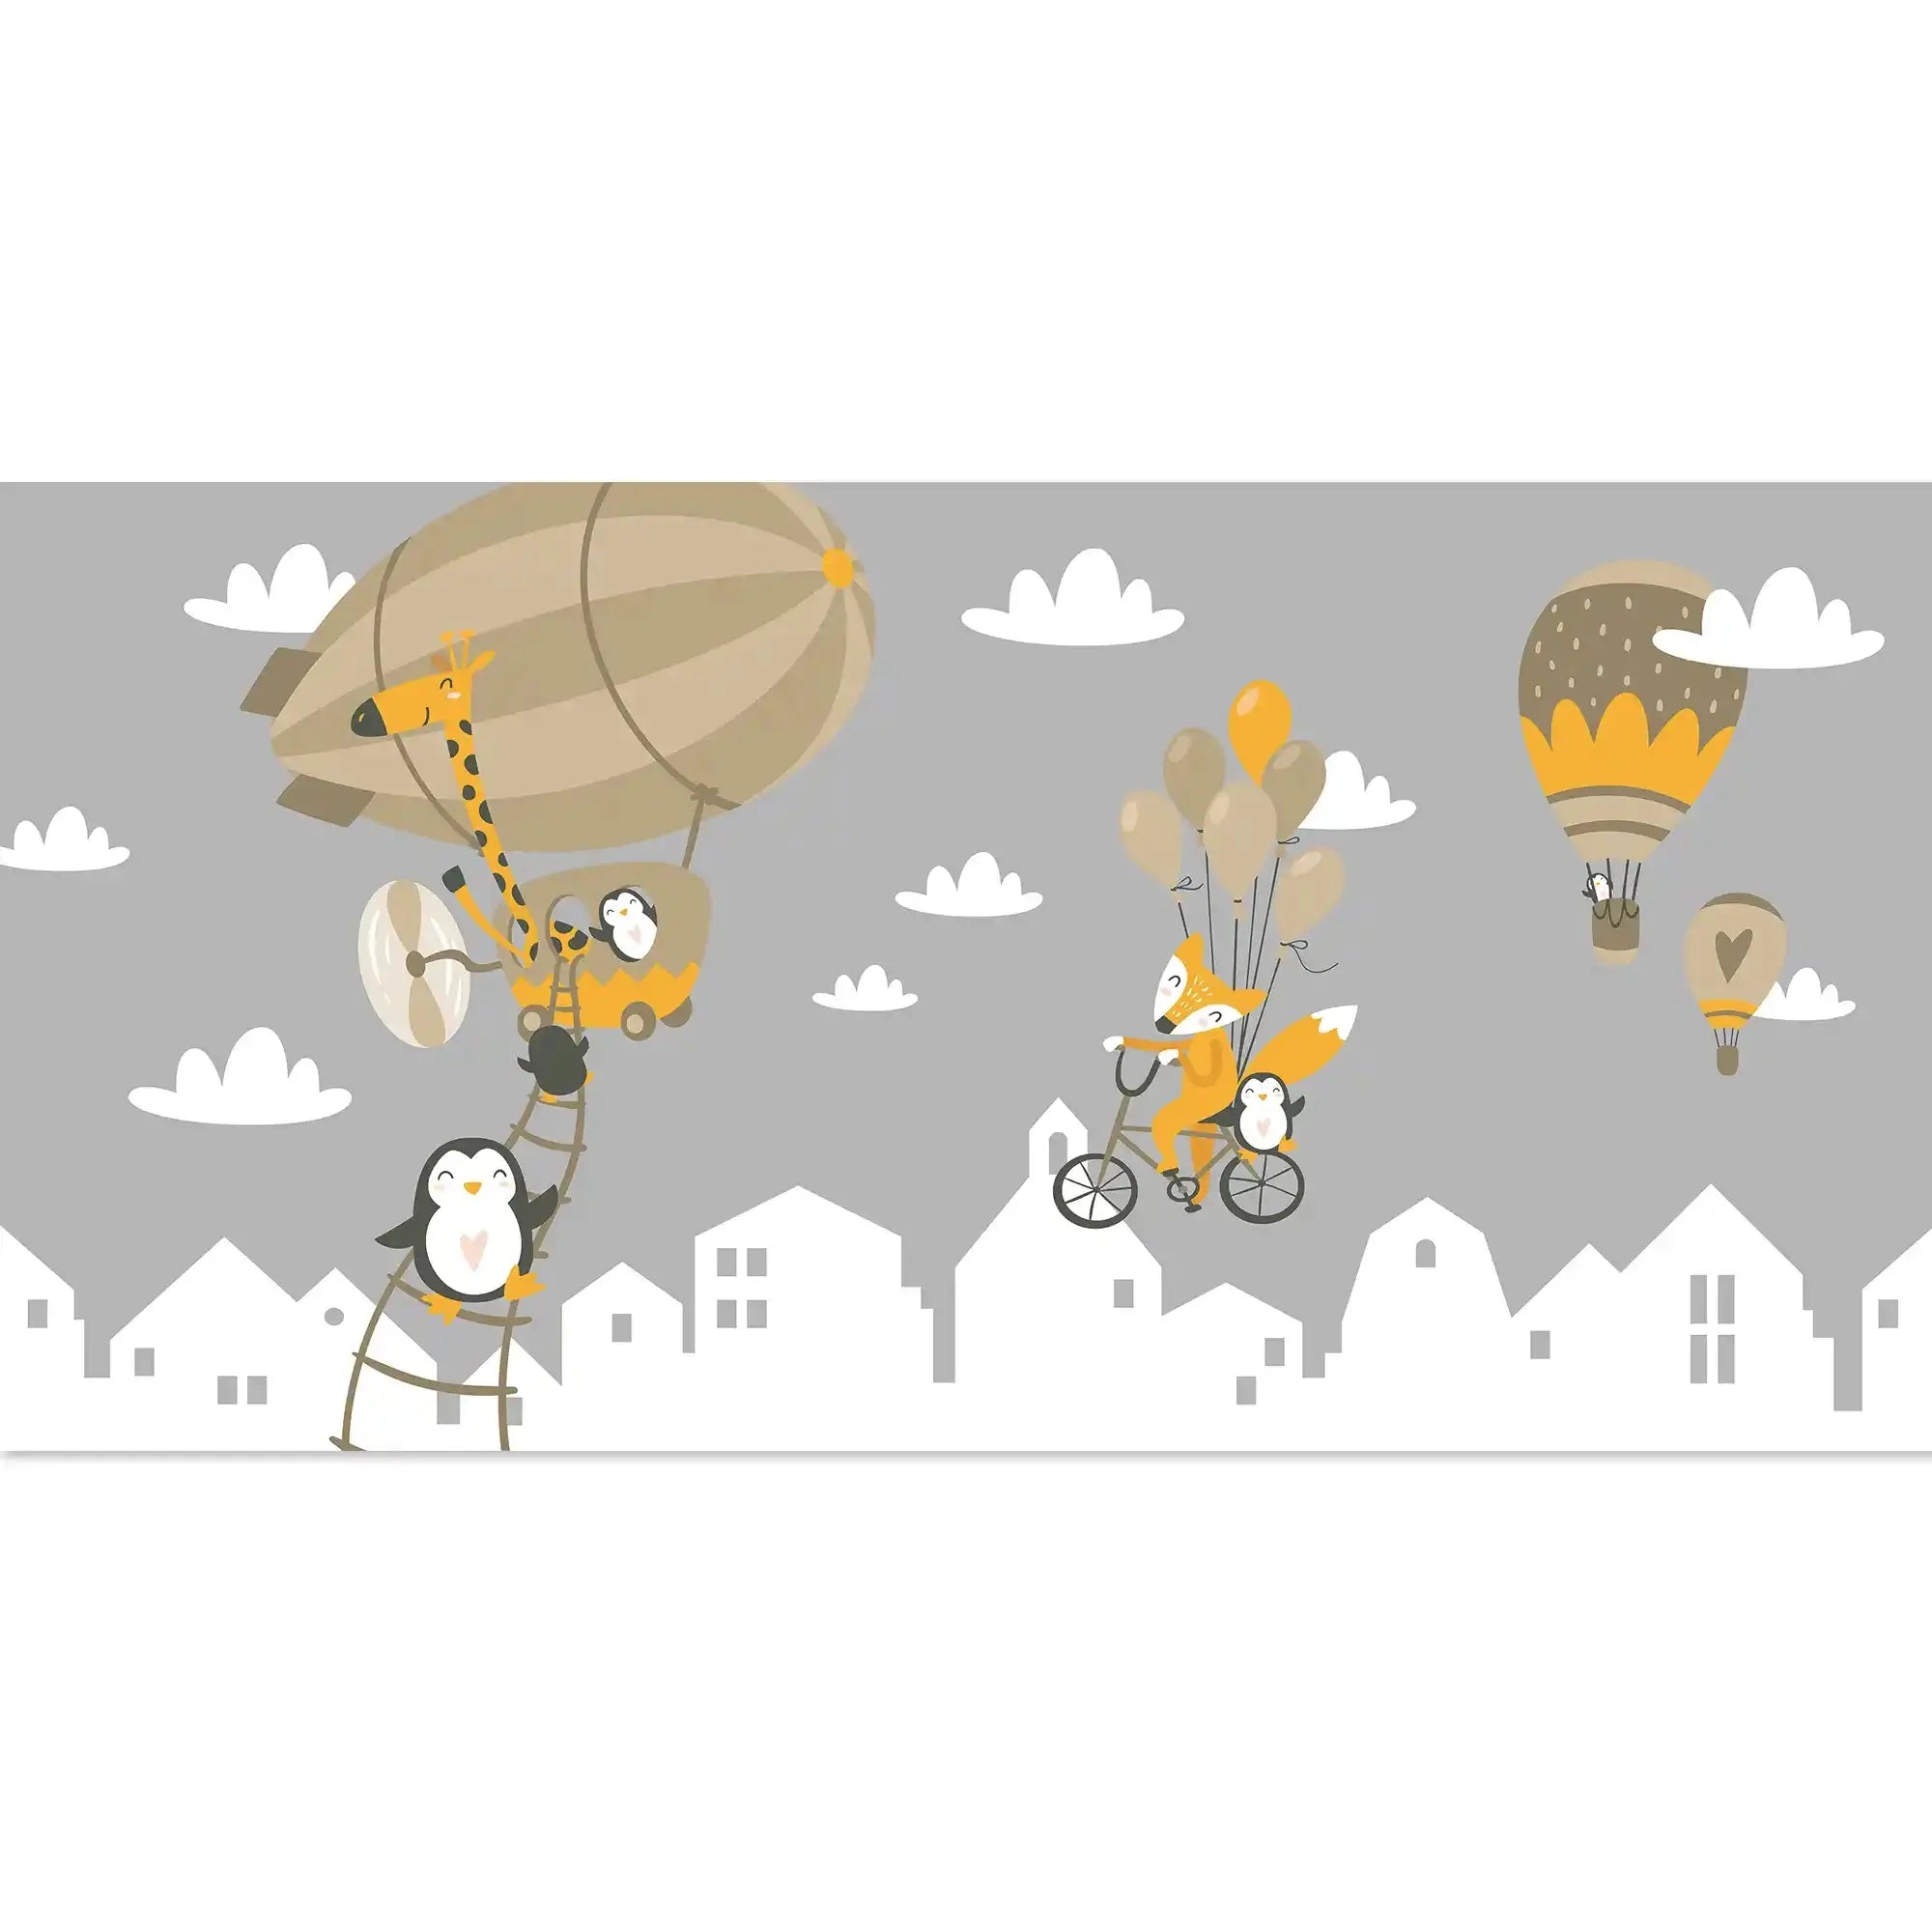 6013 / Kids Room Peel and Stick Wallpaper with Penguin and Hot Air Balloons Theme - Nursery Decor - Artevella